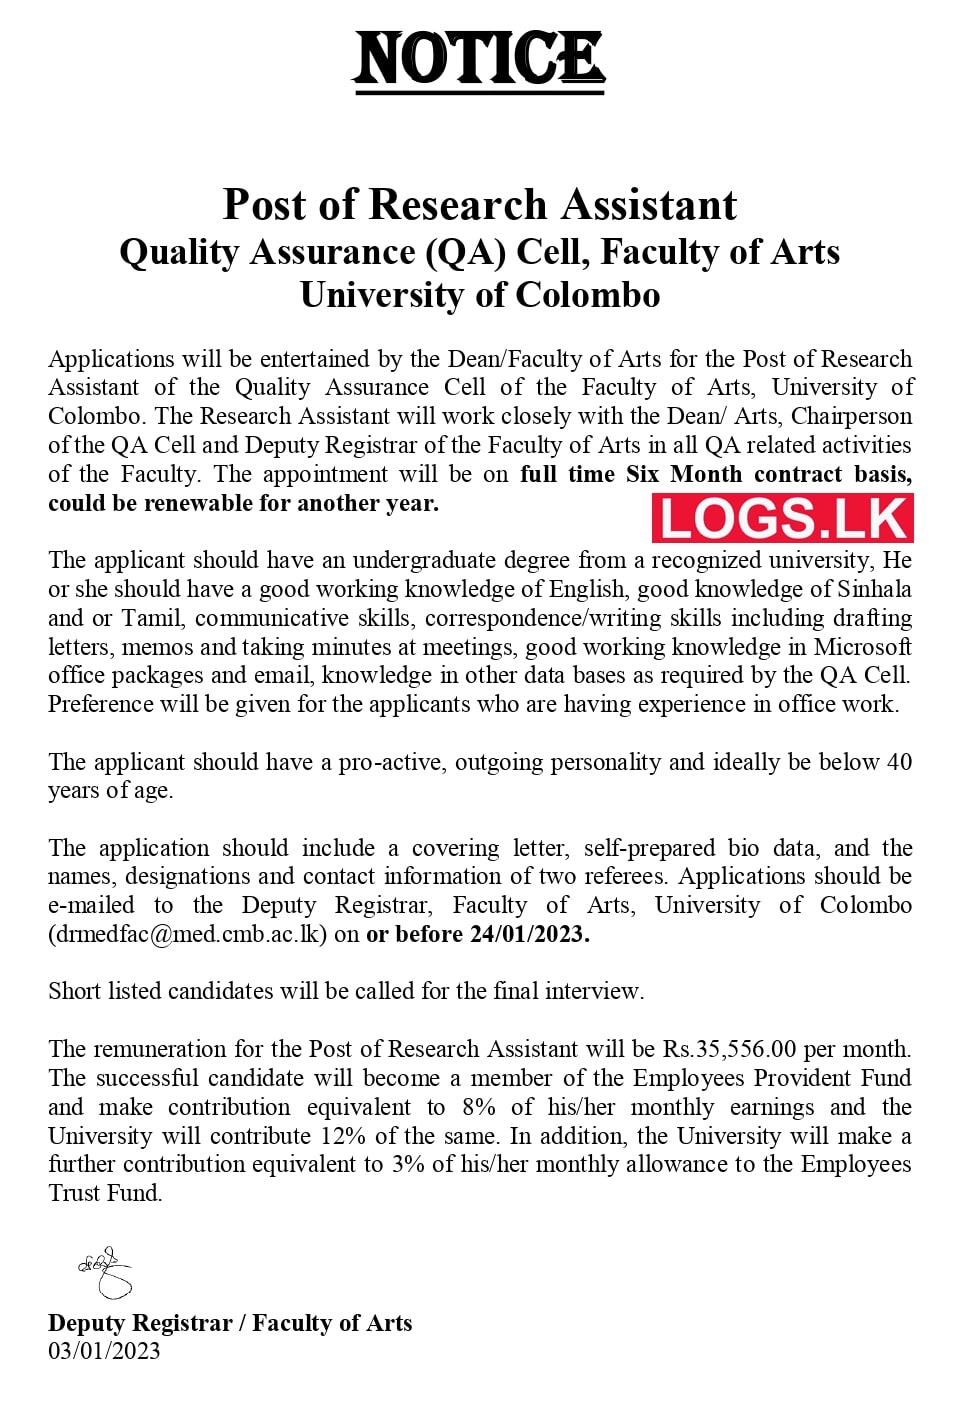 Research Assistant Quality Assurance - University of Colombo Vacancies 2023 Application Form, Details Download